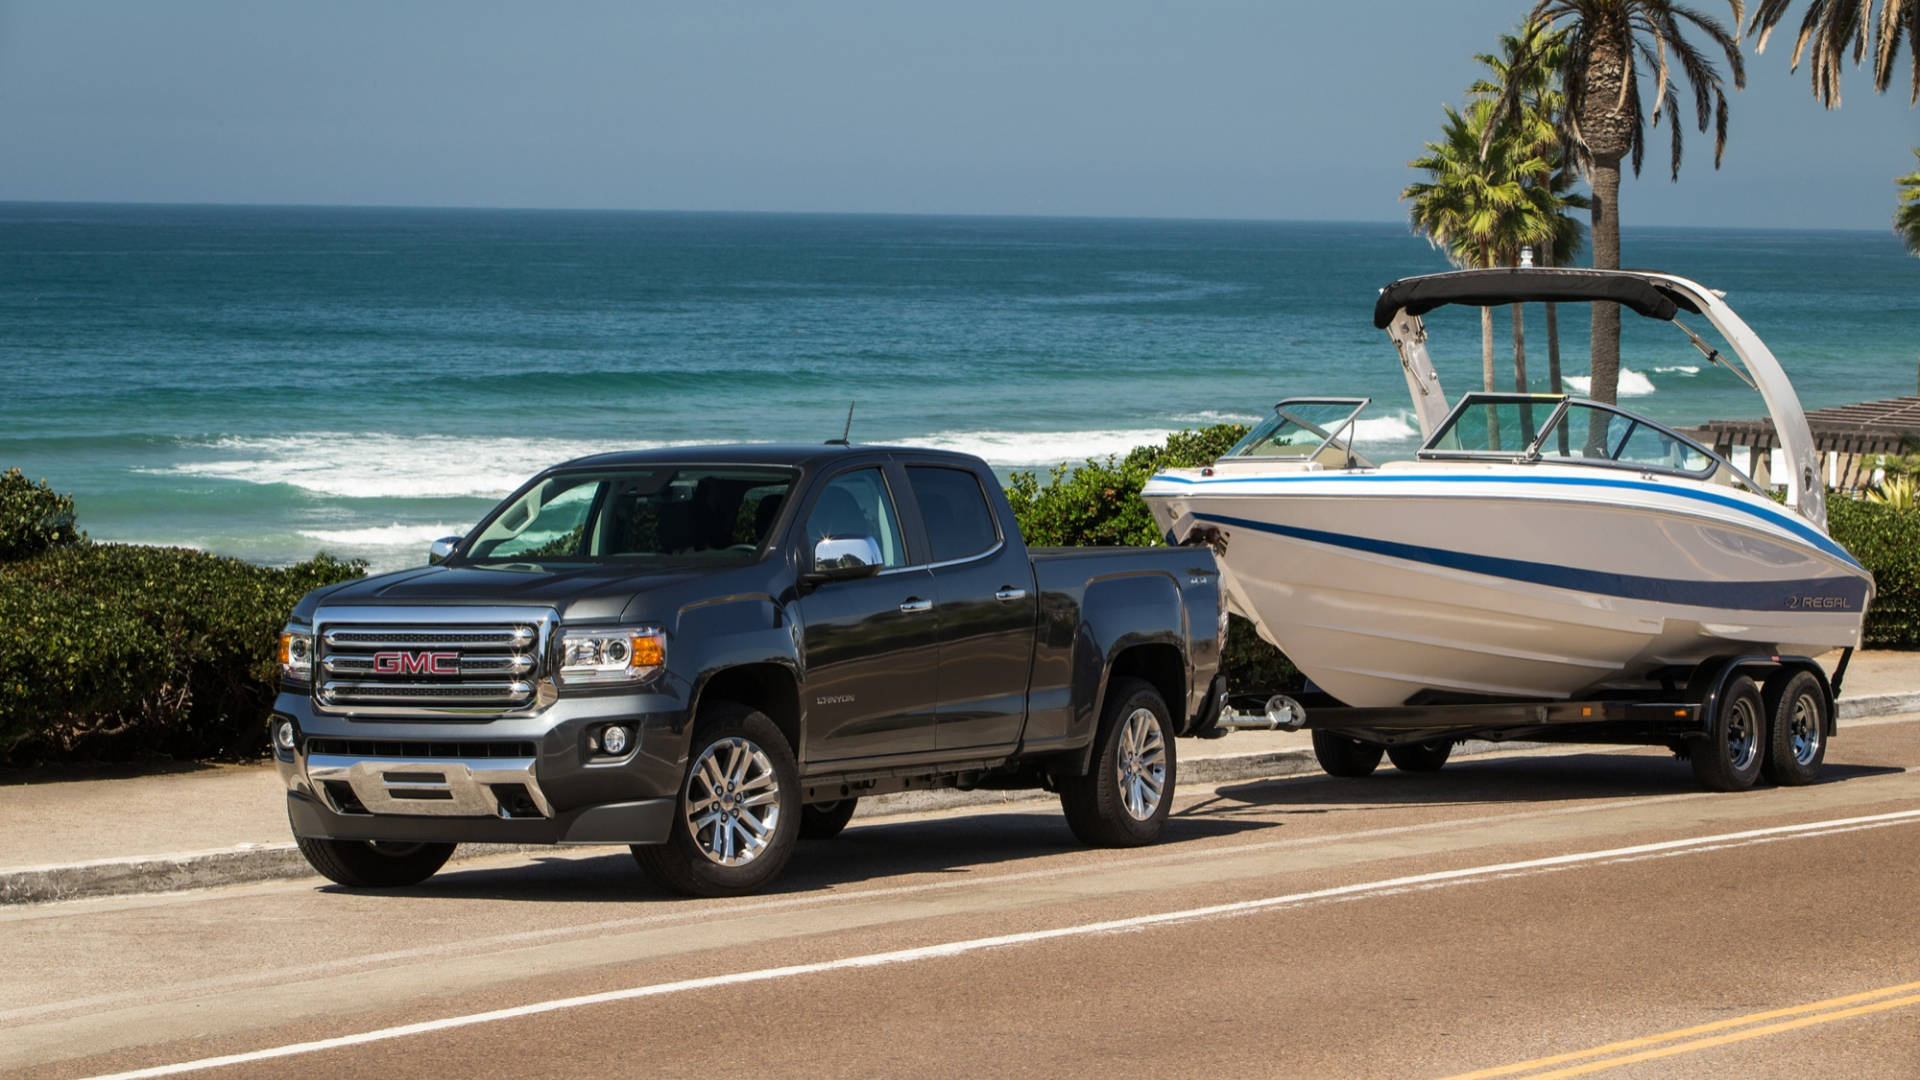 Gmc Vehicle And A Motor Boat